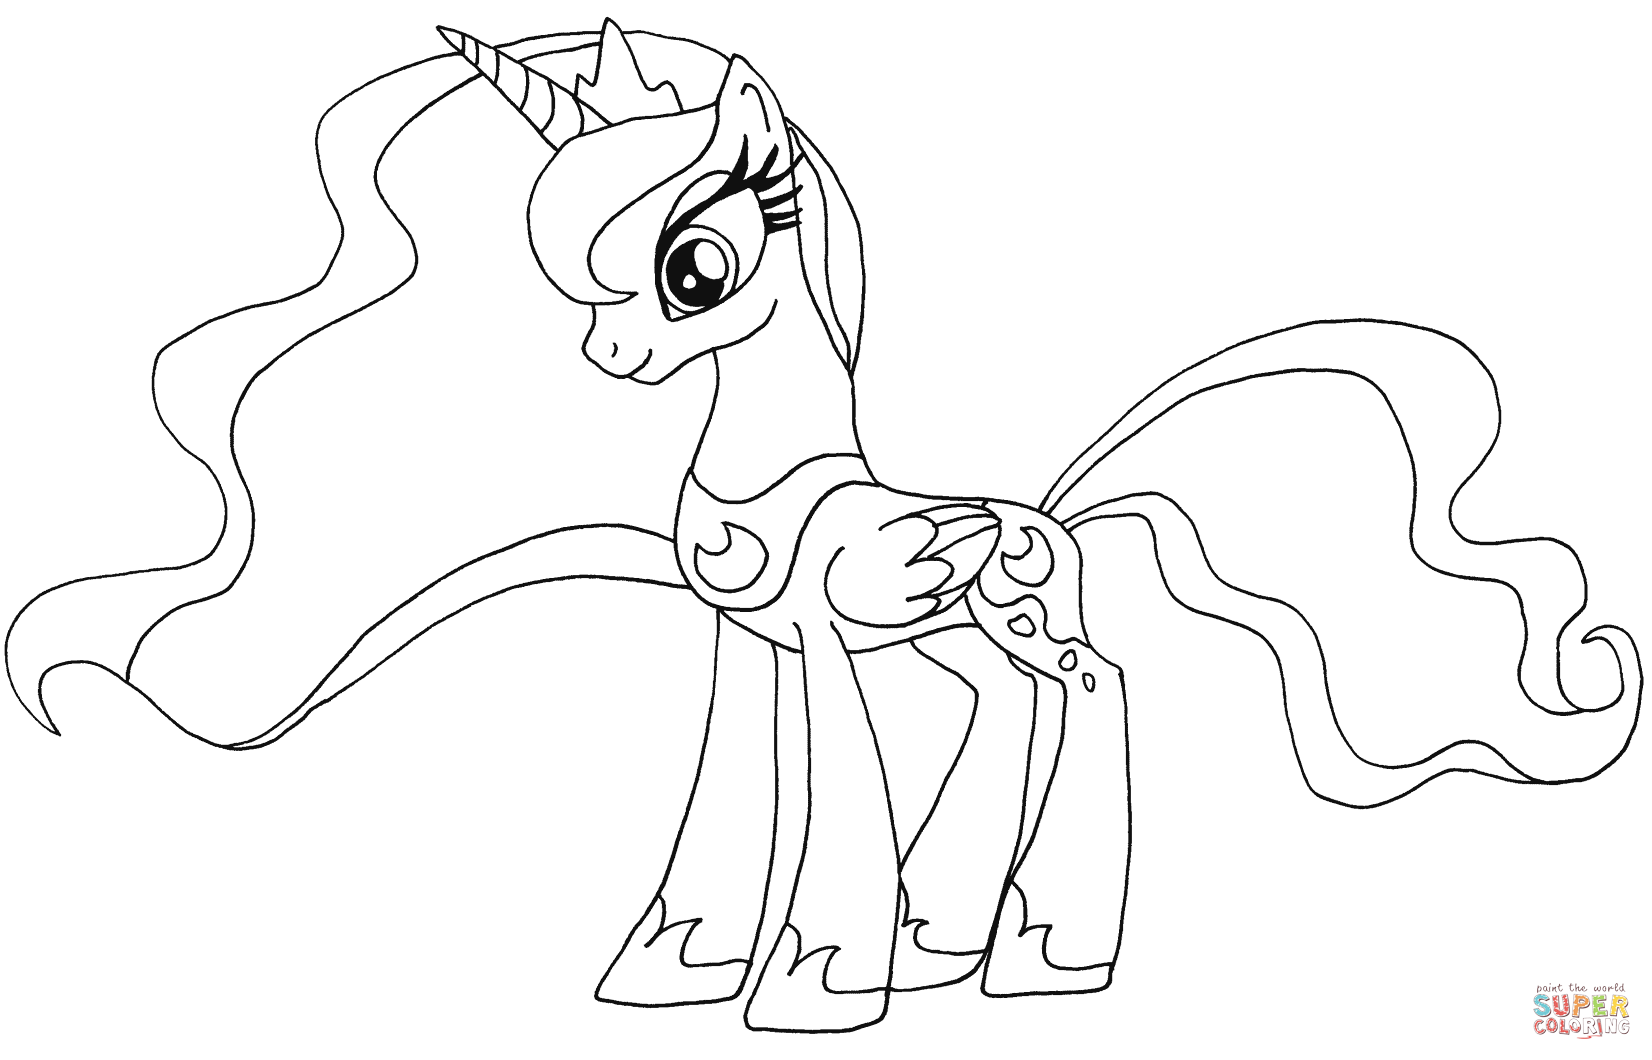 My Little Pony Princess Luna coloring page | Free Printable ...